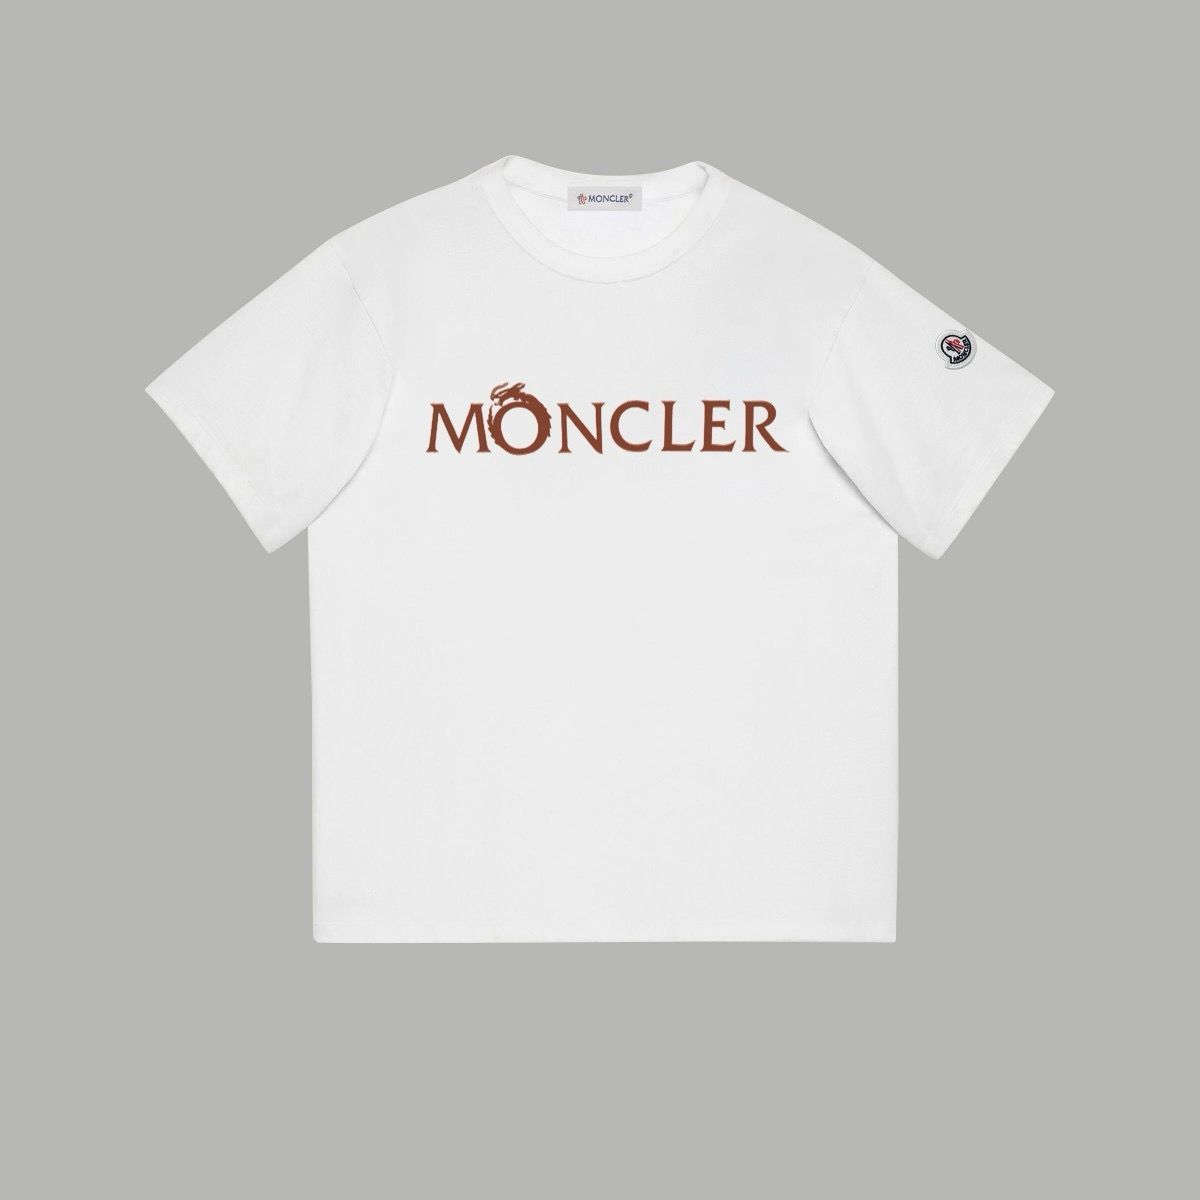 NEW限定品【新品未使用】moncler モンクレール　Tシャツ　ロゴ トップス